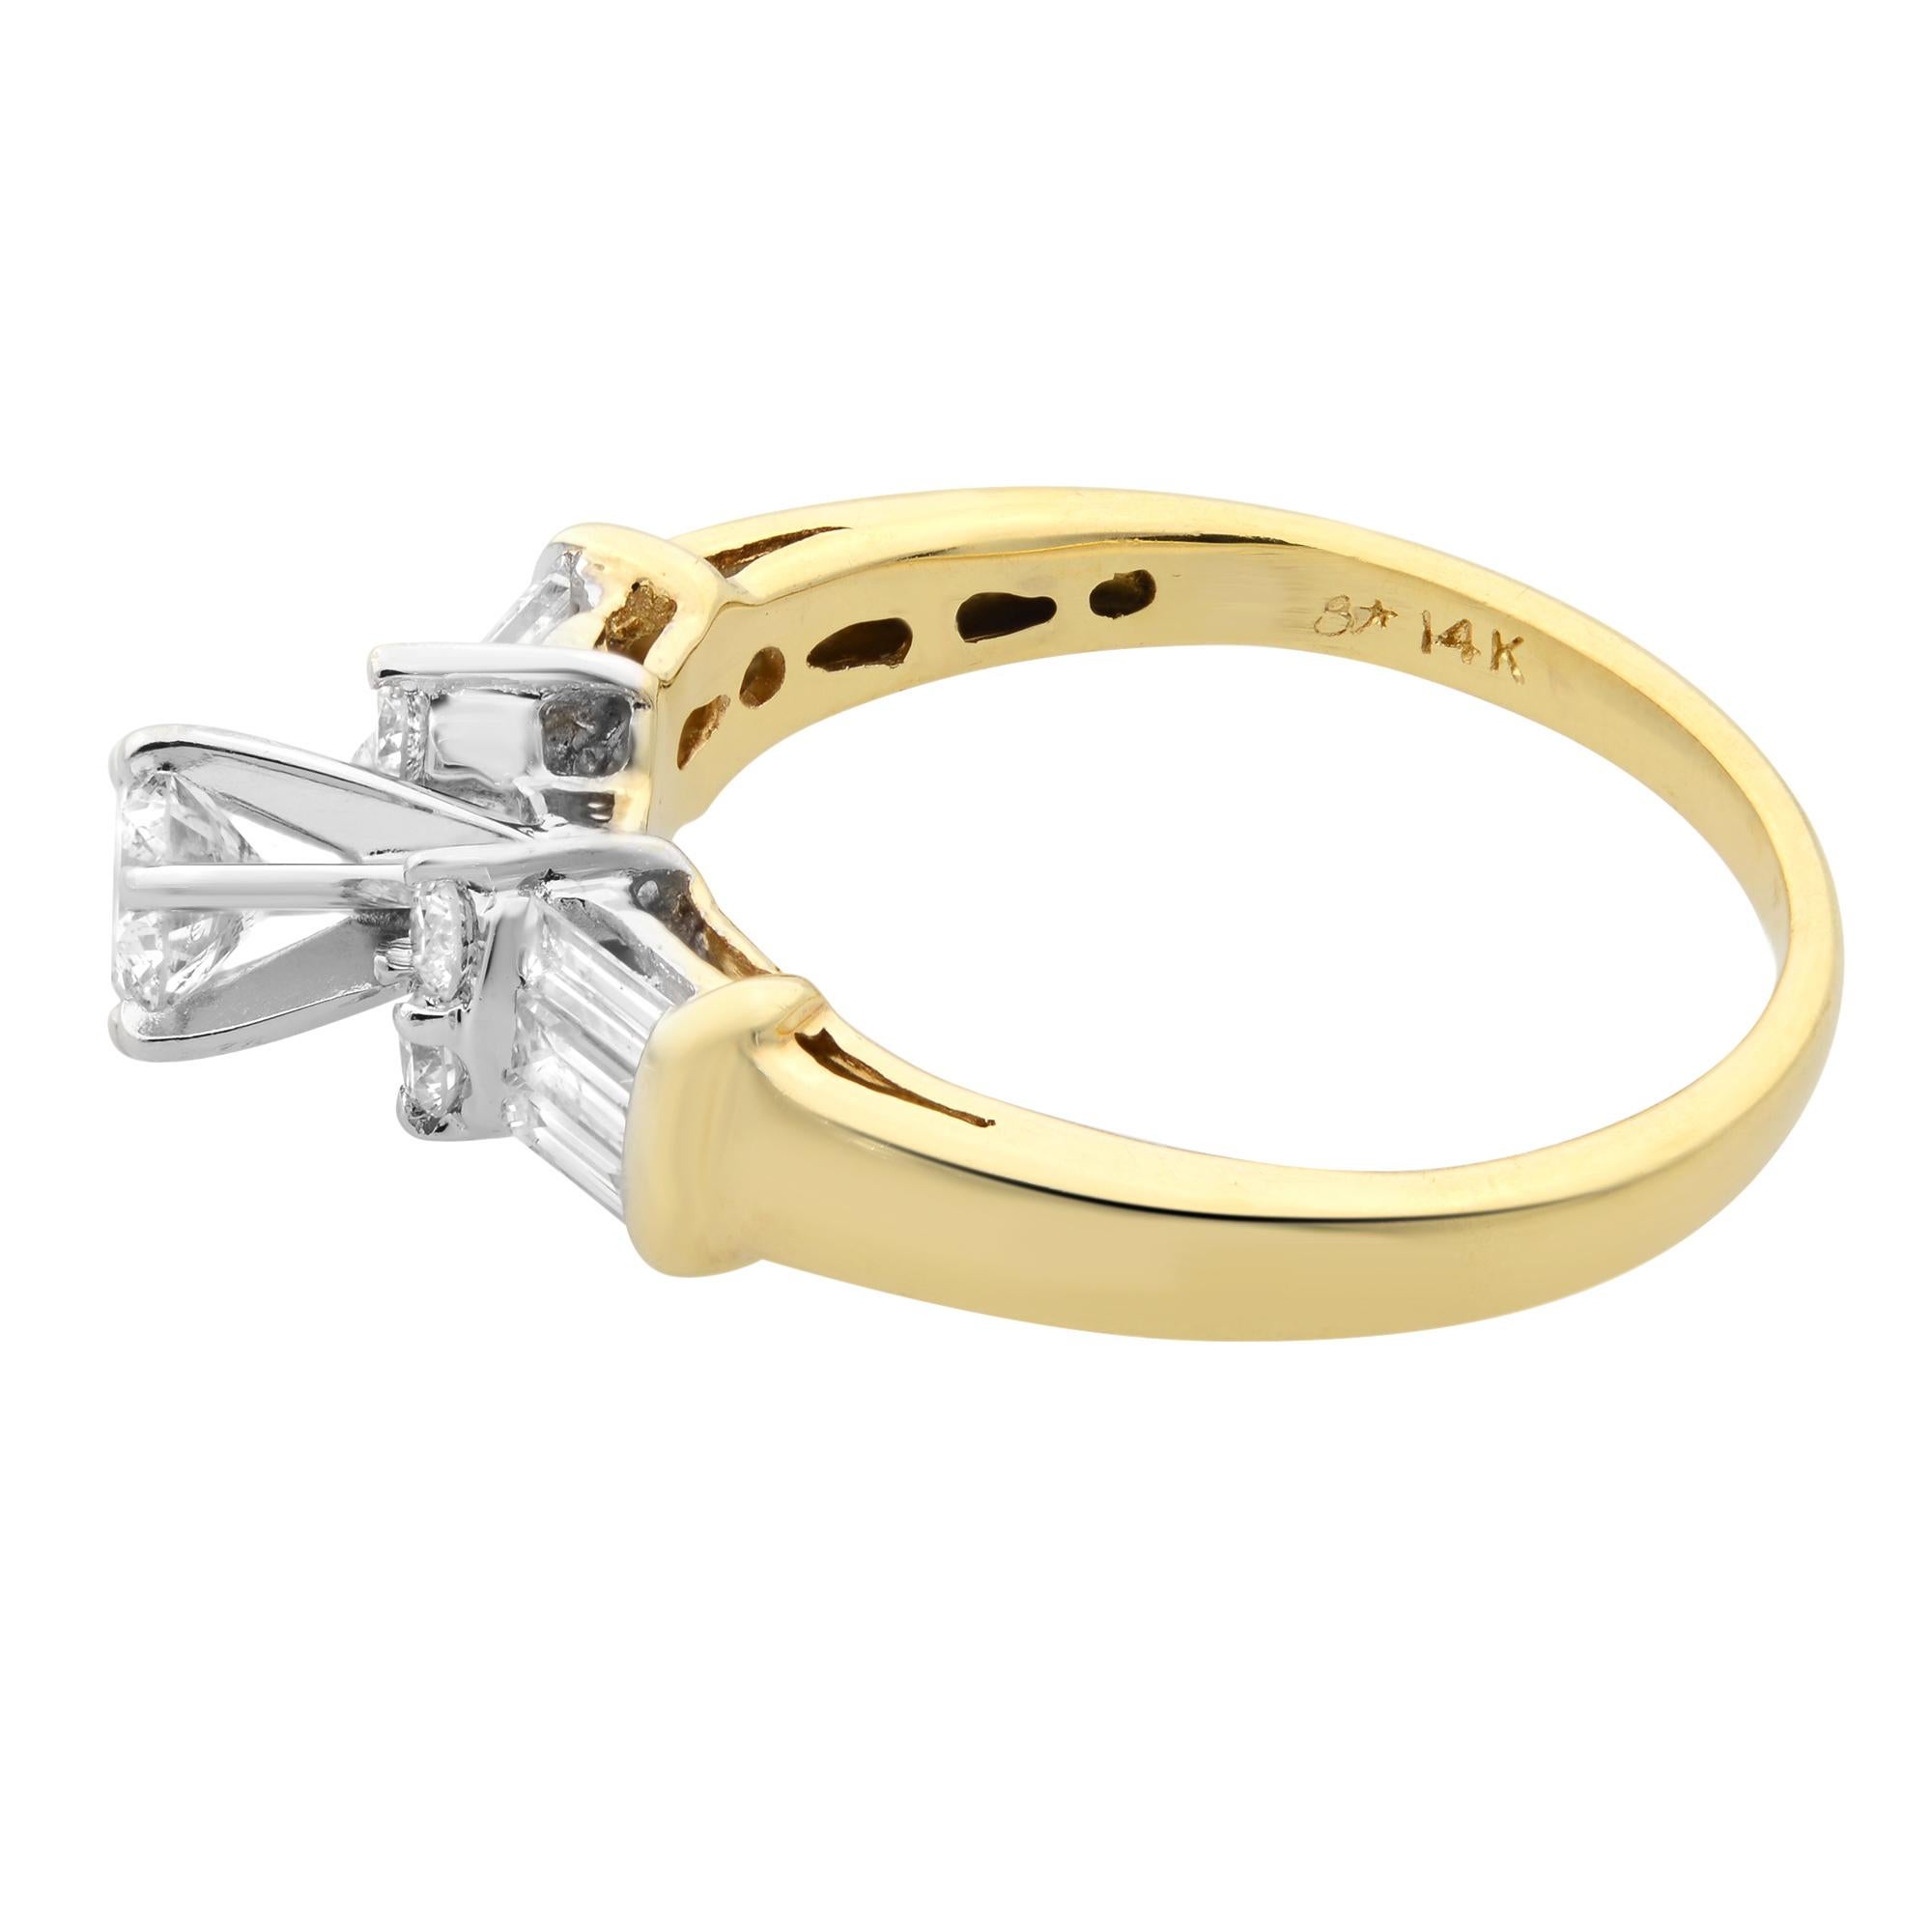 Modern 1.00Cttw Round & Baguette Cut Diamond Engagement Ring 14K Yellow Gold Size 6.5 For Sale